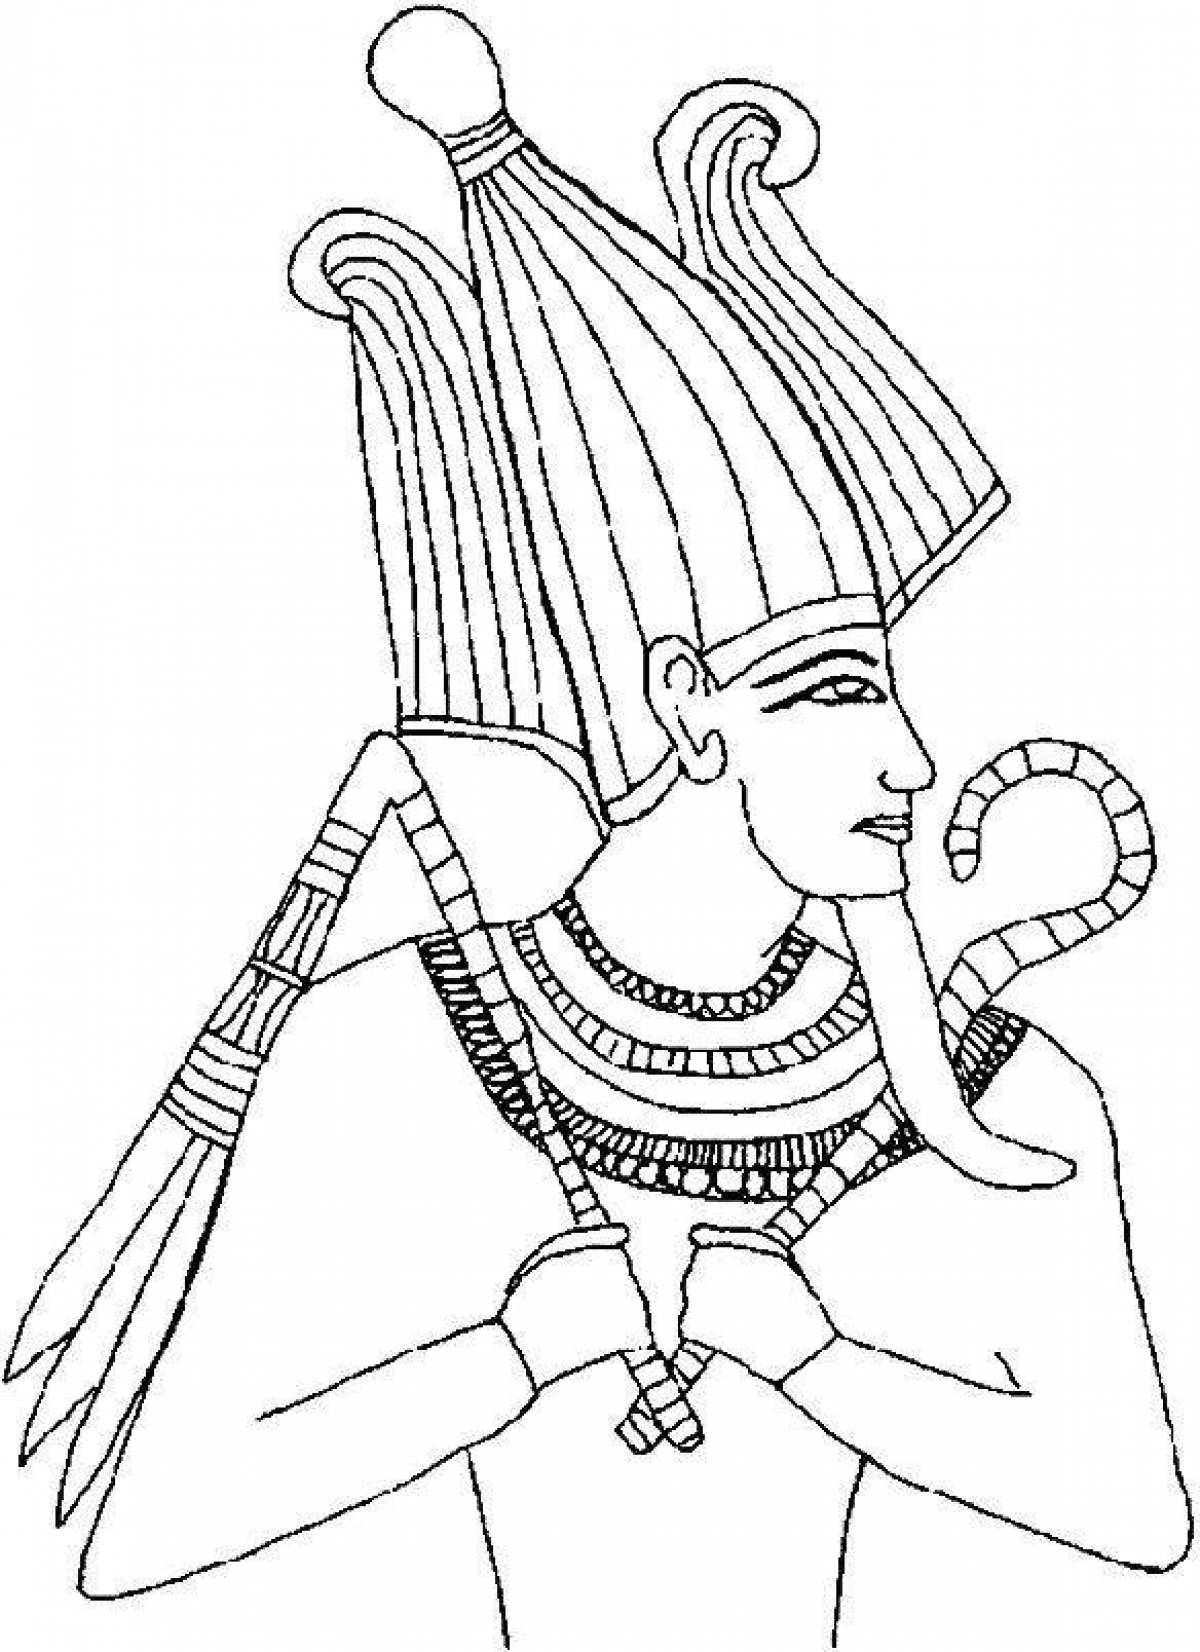 Coloring page spectacular pharaoh